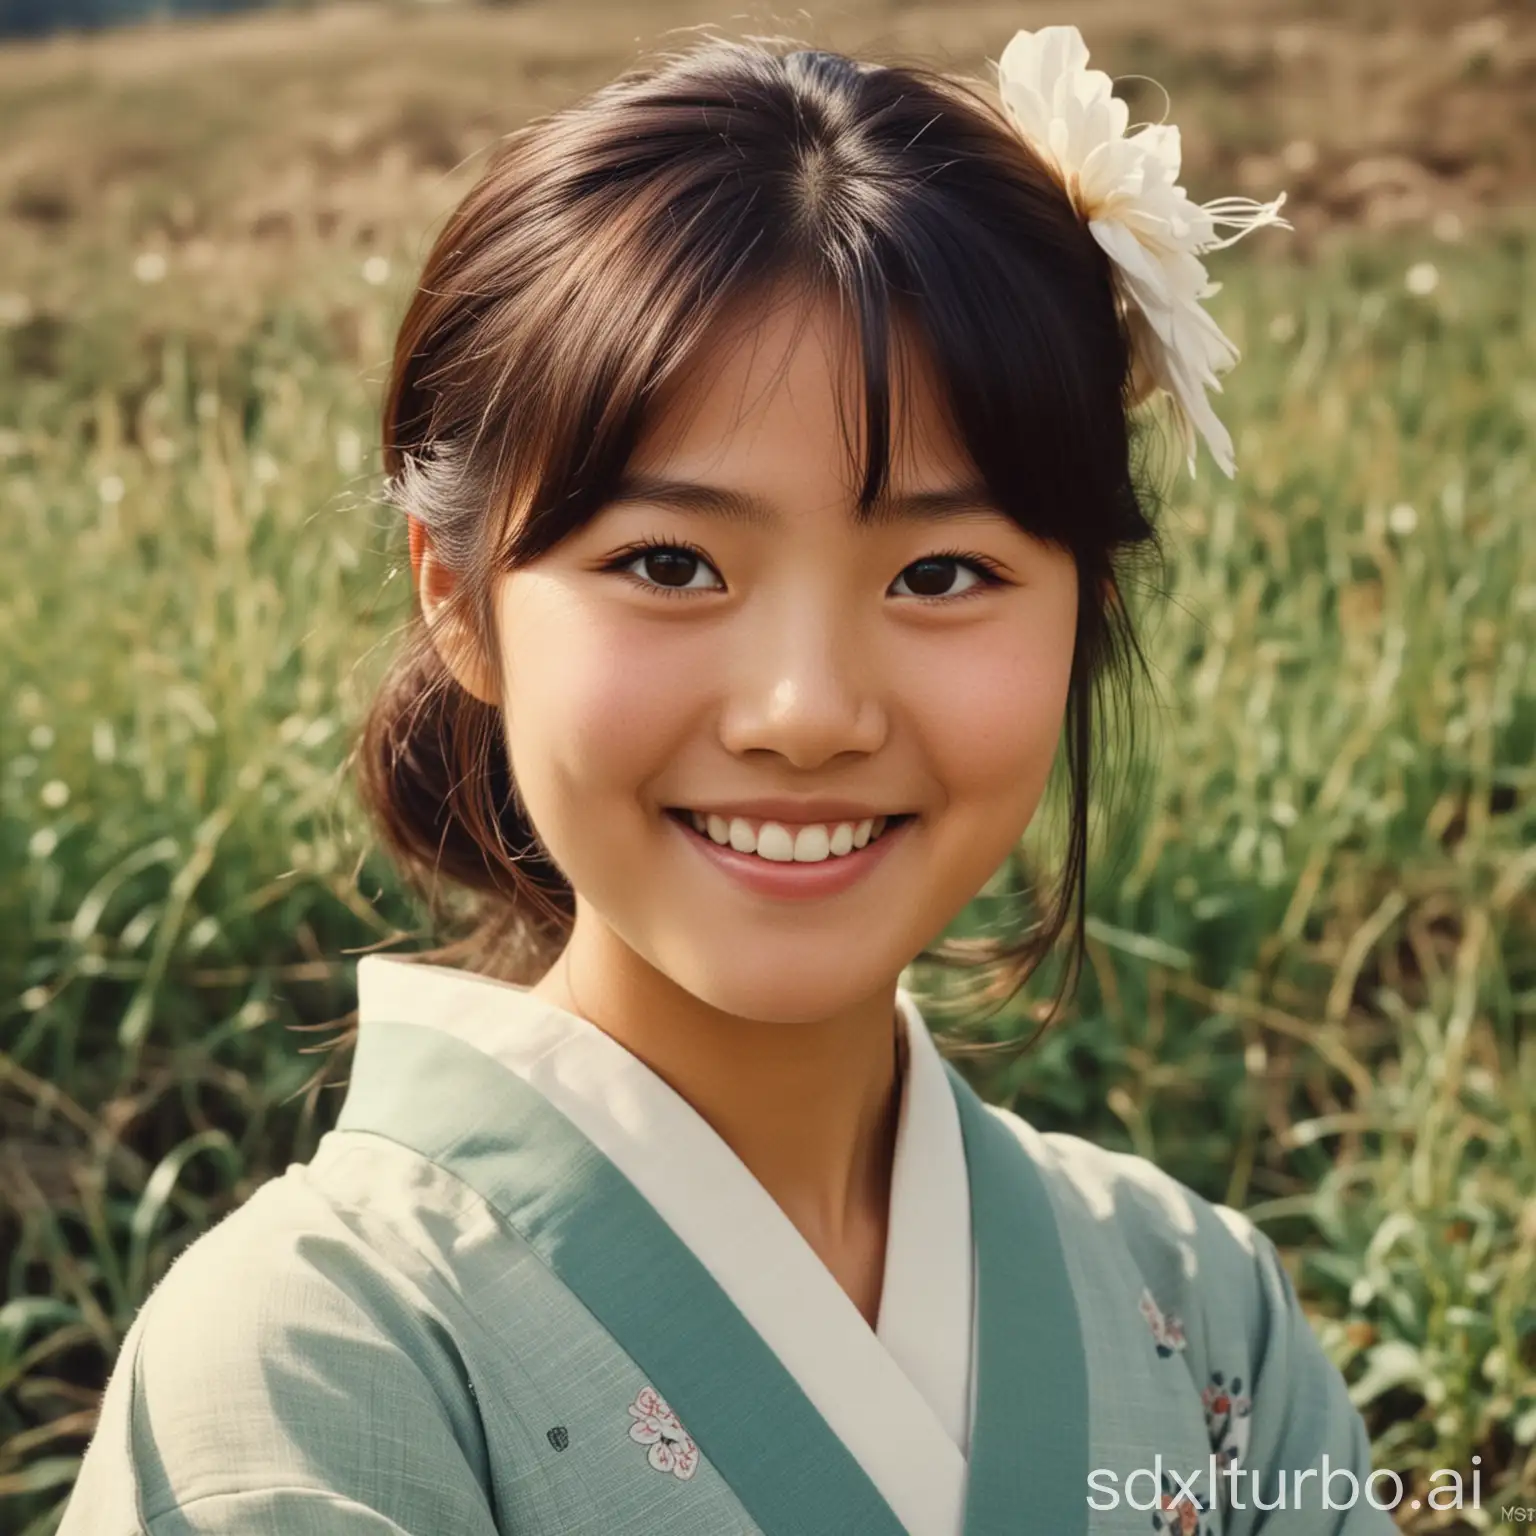 Smiling-Rural-Japanese-Girl-in-Vintage-1960s-Photograph